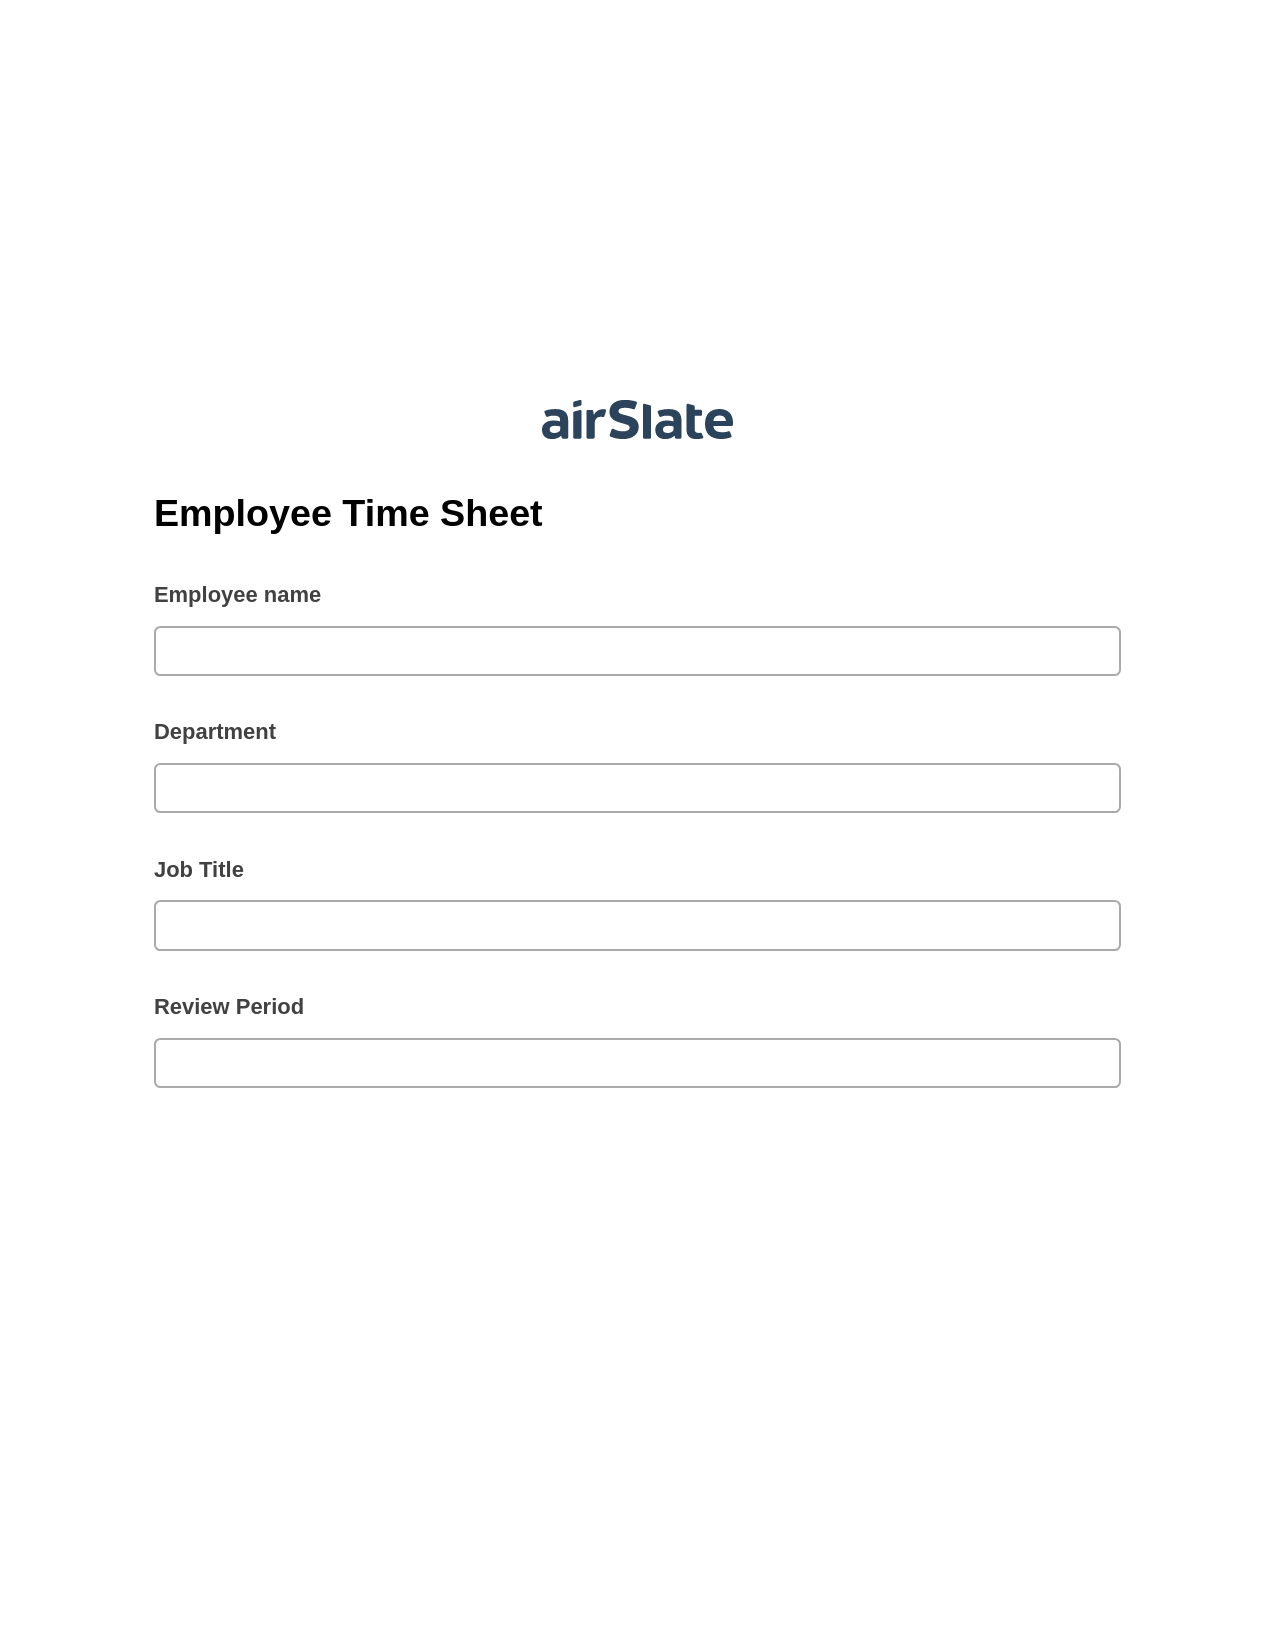 Multirole Employee Time Sheet Pre-fill Dropdowns from CSV file Bot, Create Salesforce Records Bot, Email Notification Postfinish Bot